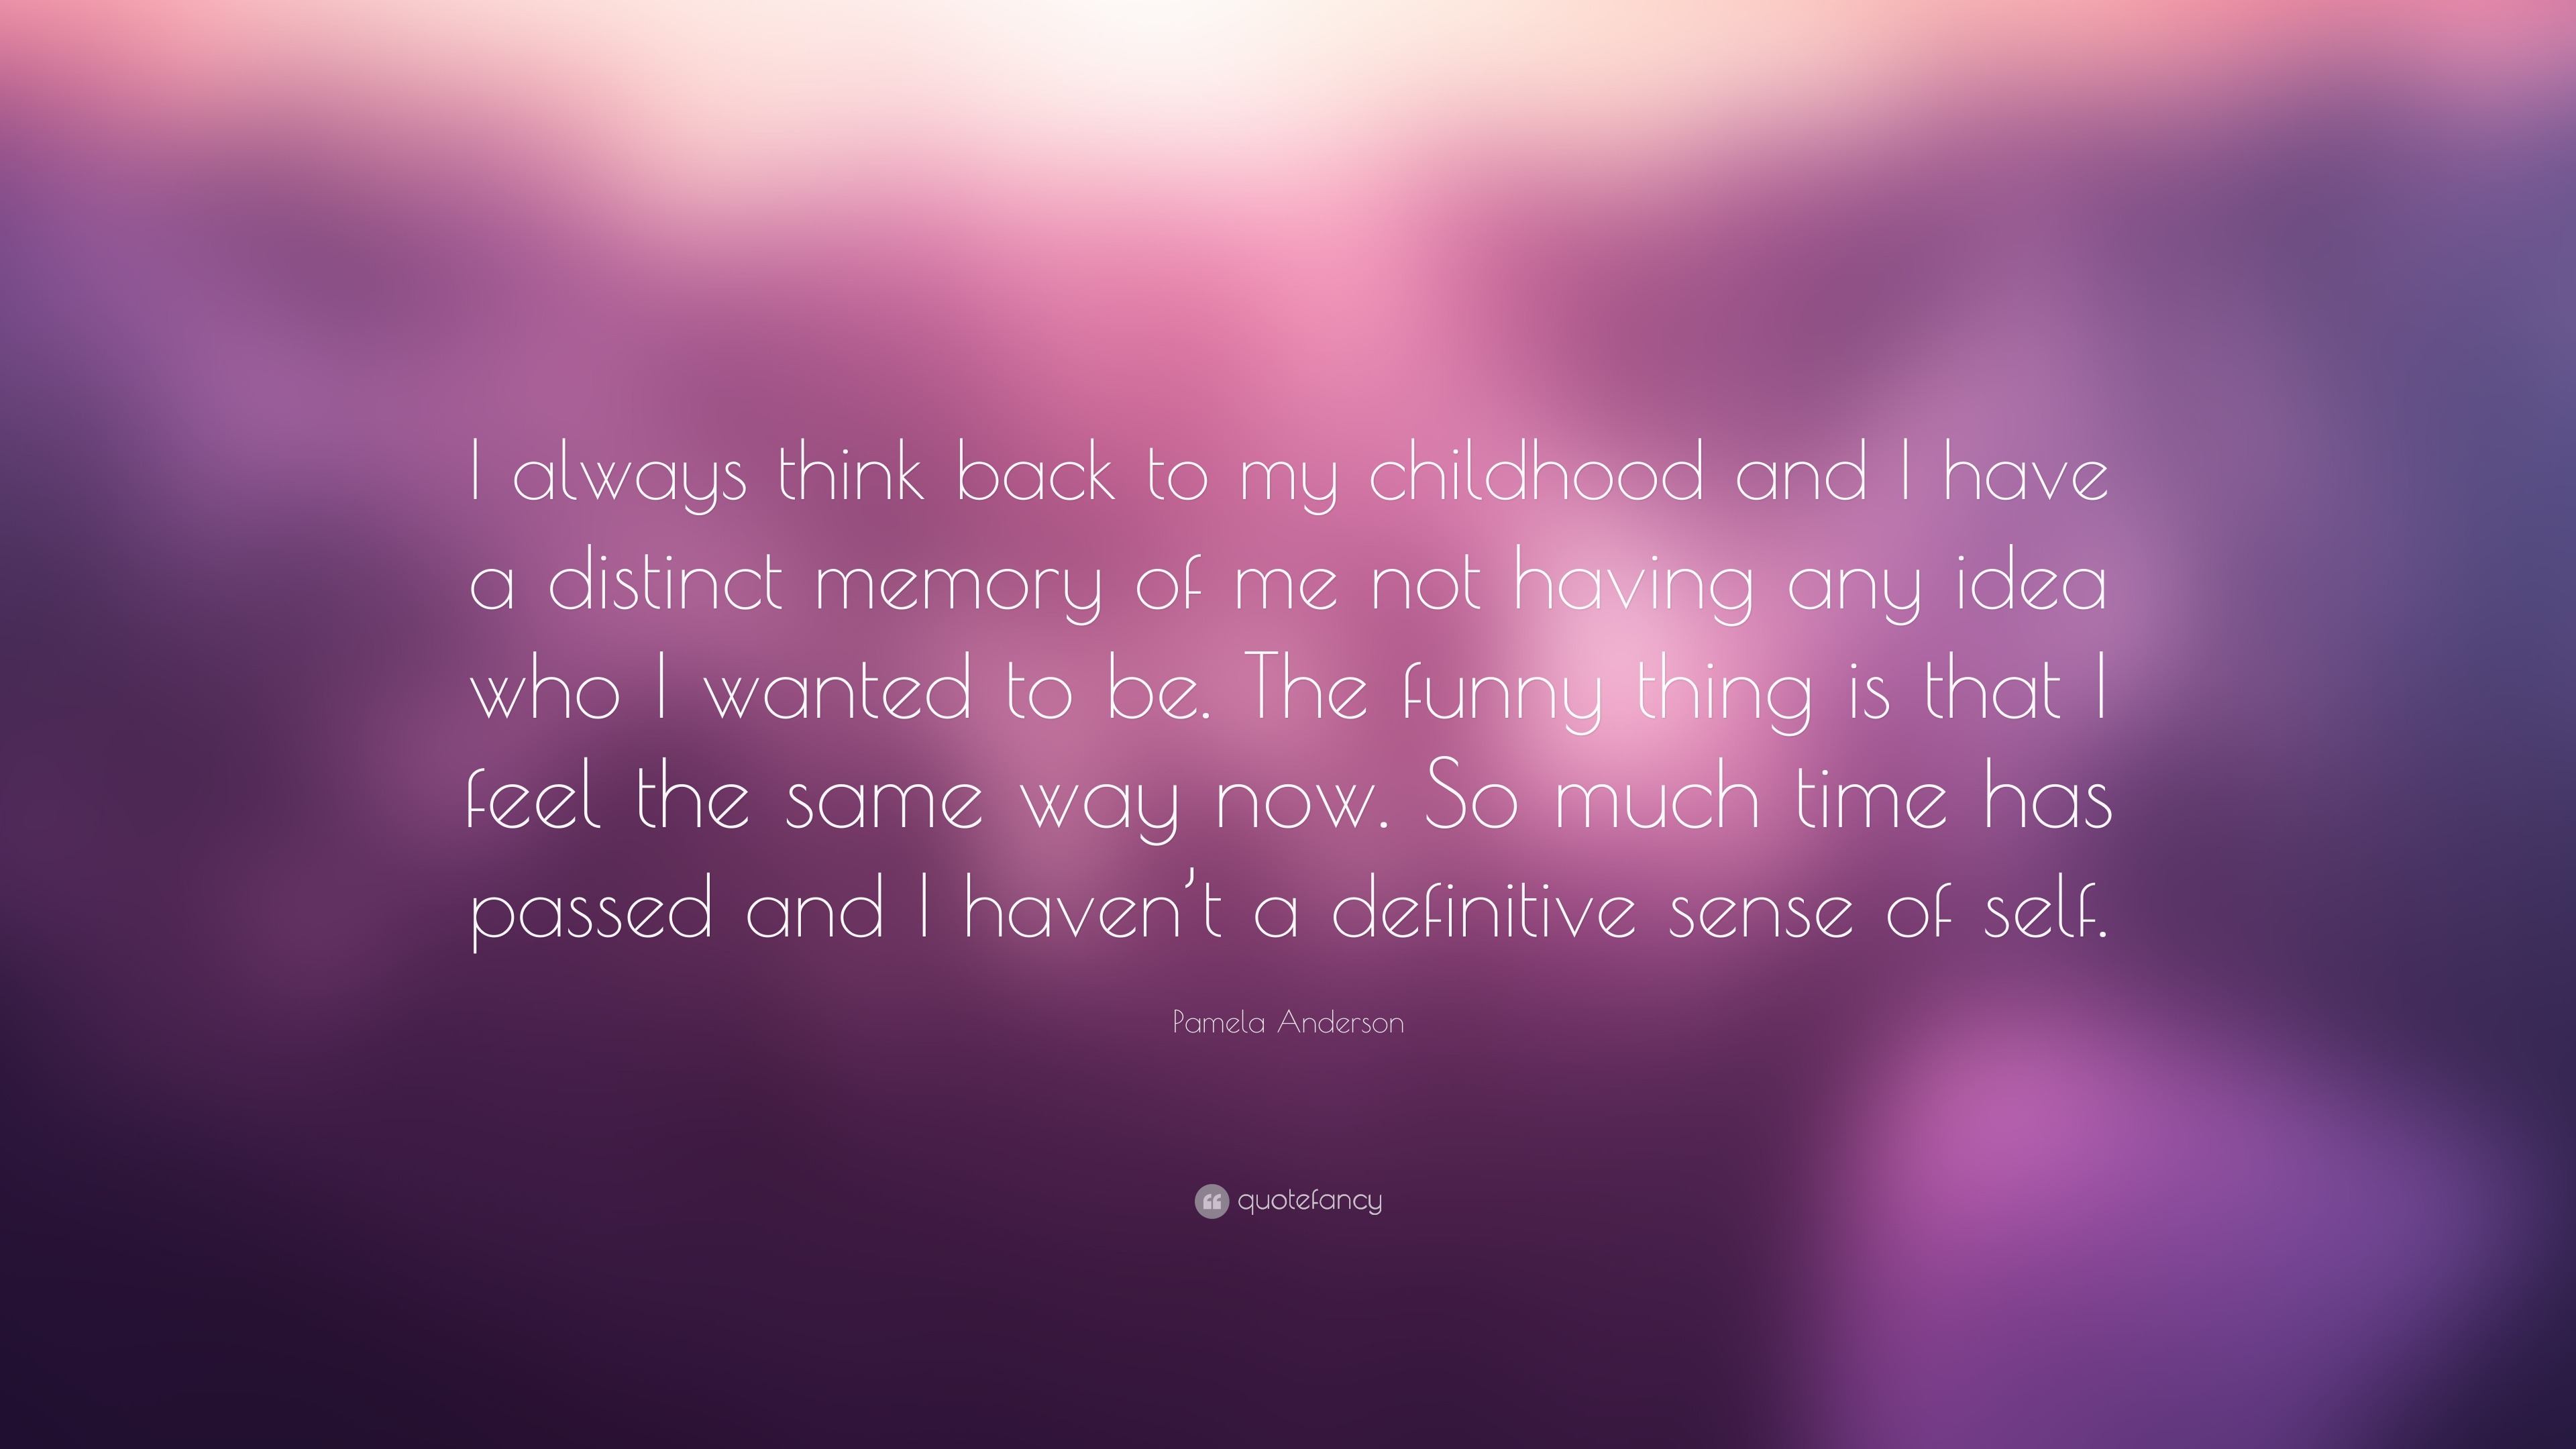 Pamela Anderson Quote: “I always think back to my childhood and I have a  distinct memory of me not having any idea who I wanted to be. The funny...”